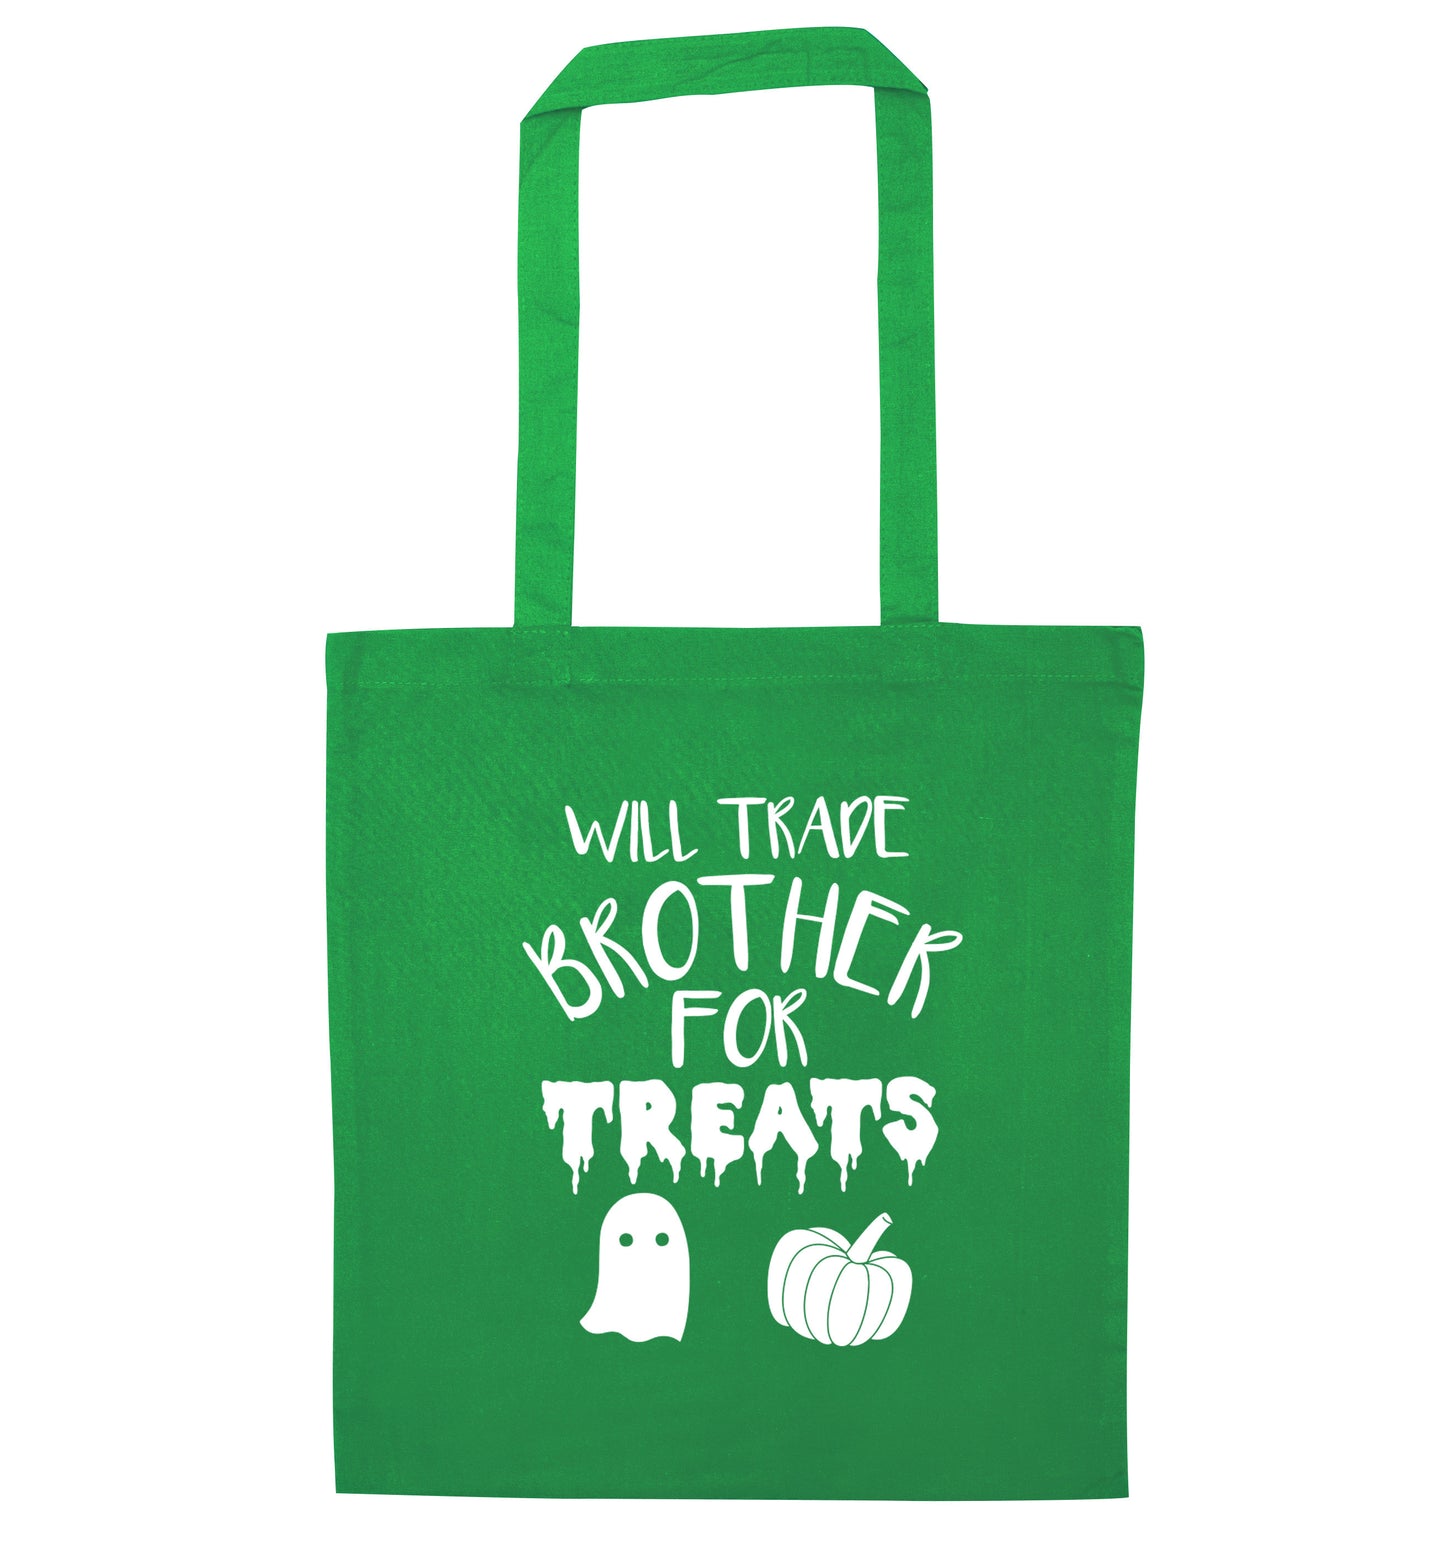 Will trade brother for treats green tote bag